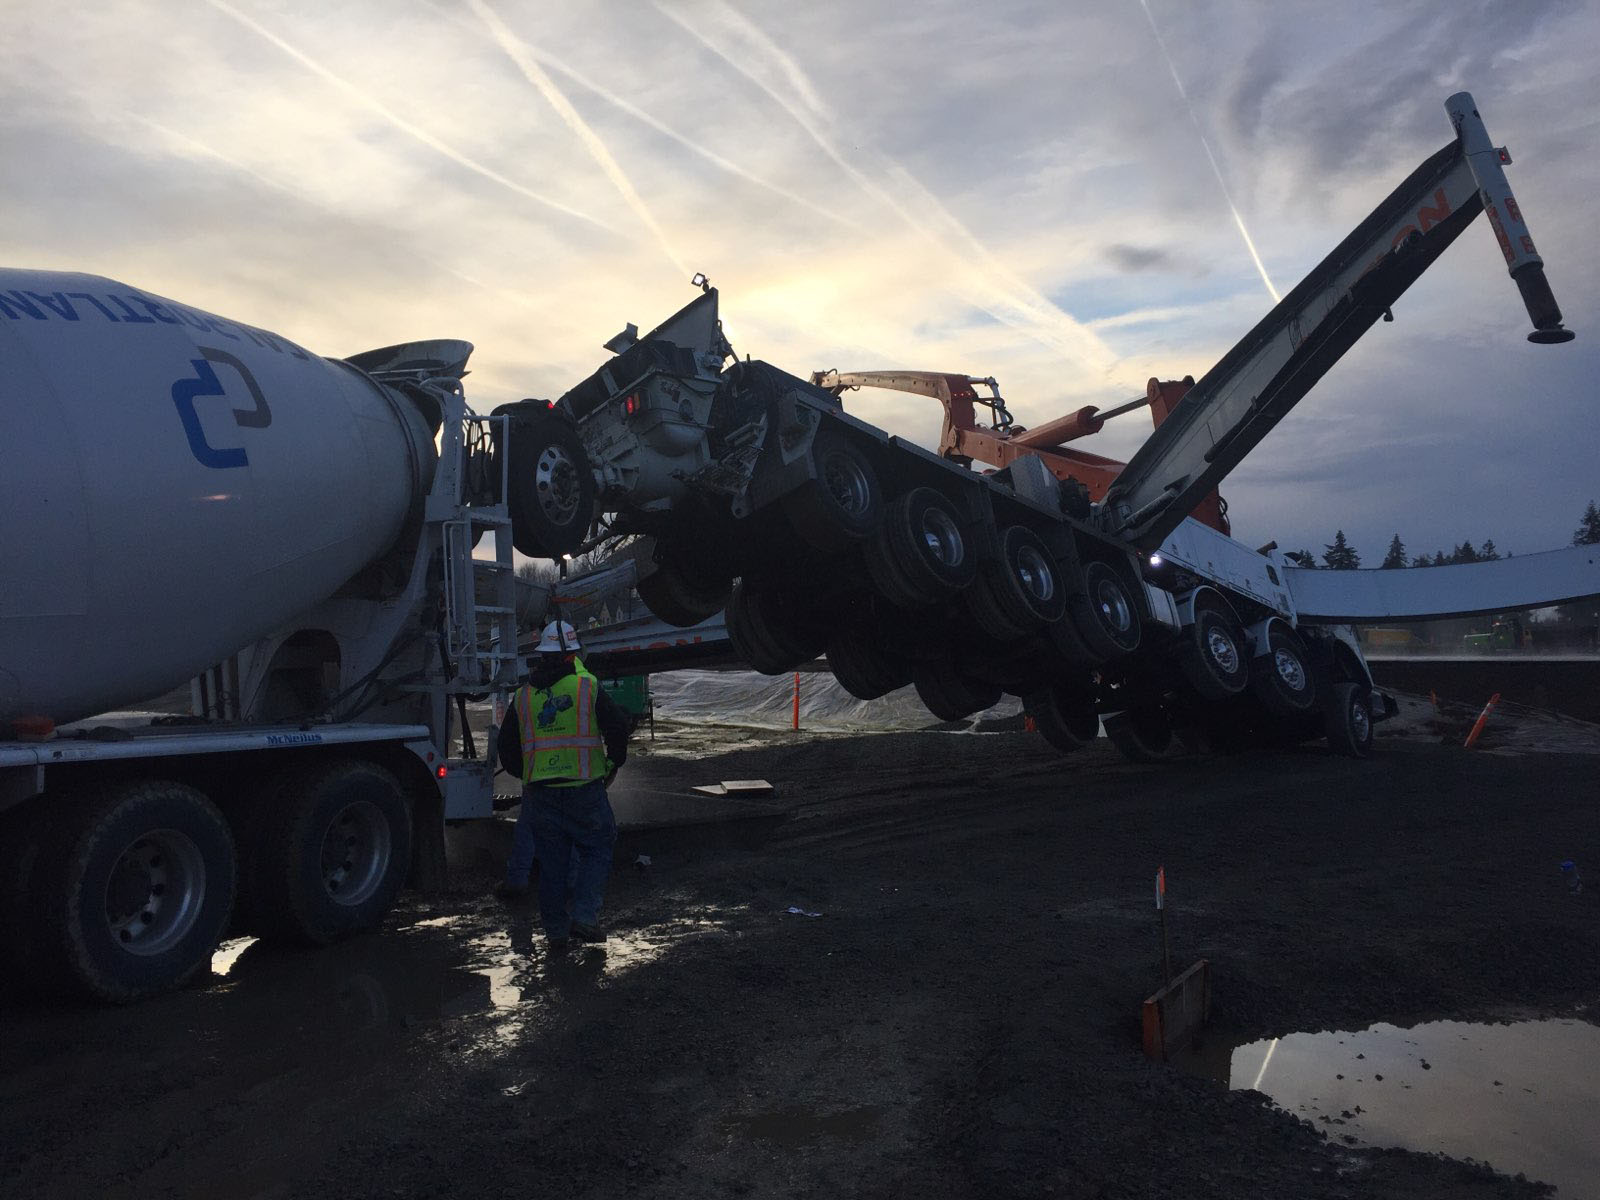 The driver of a concrete mixer truck was seriously injured Friday morning after a concrete pump truck tipped, launching him off of a ladder and into nearby equipment, at a construction site in the 7100 block of South 10th Street in Ridgefield.